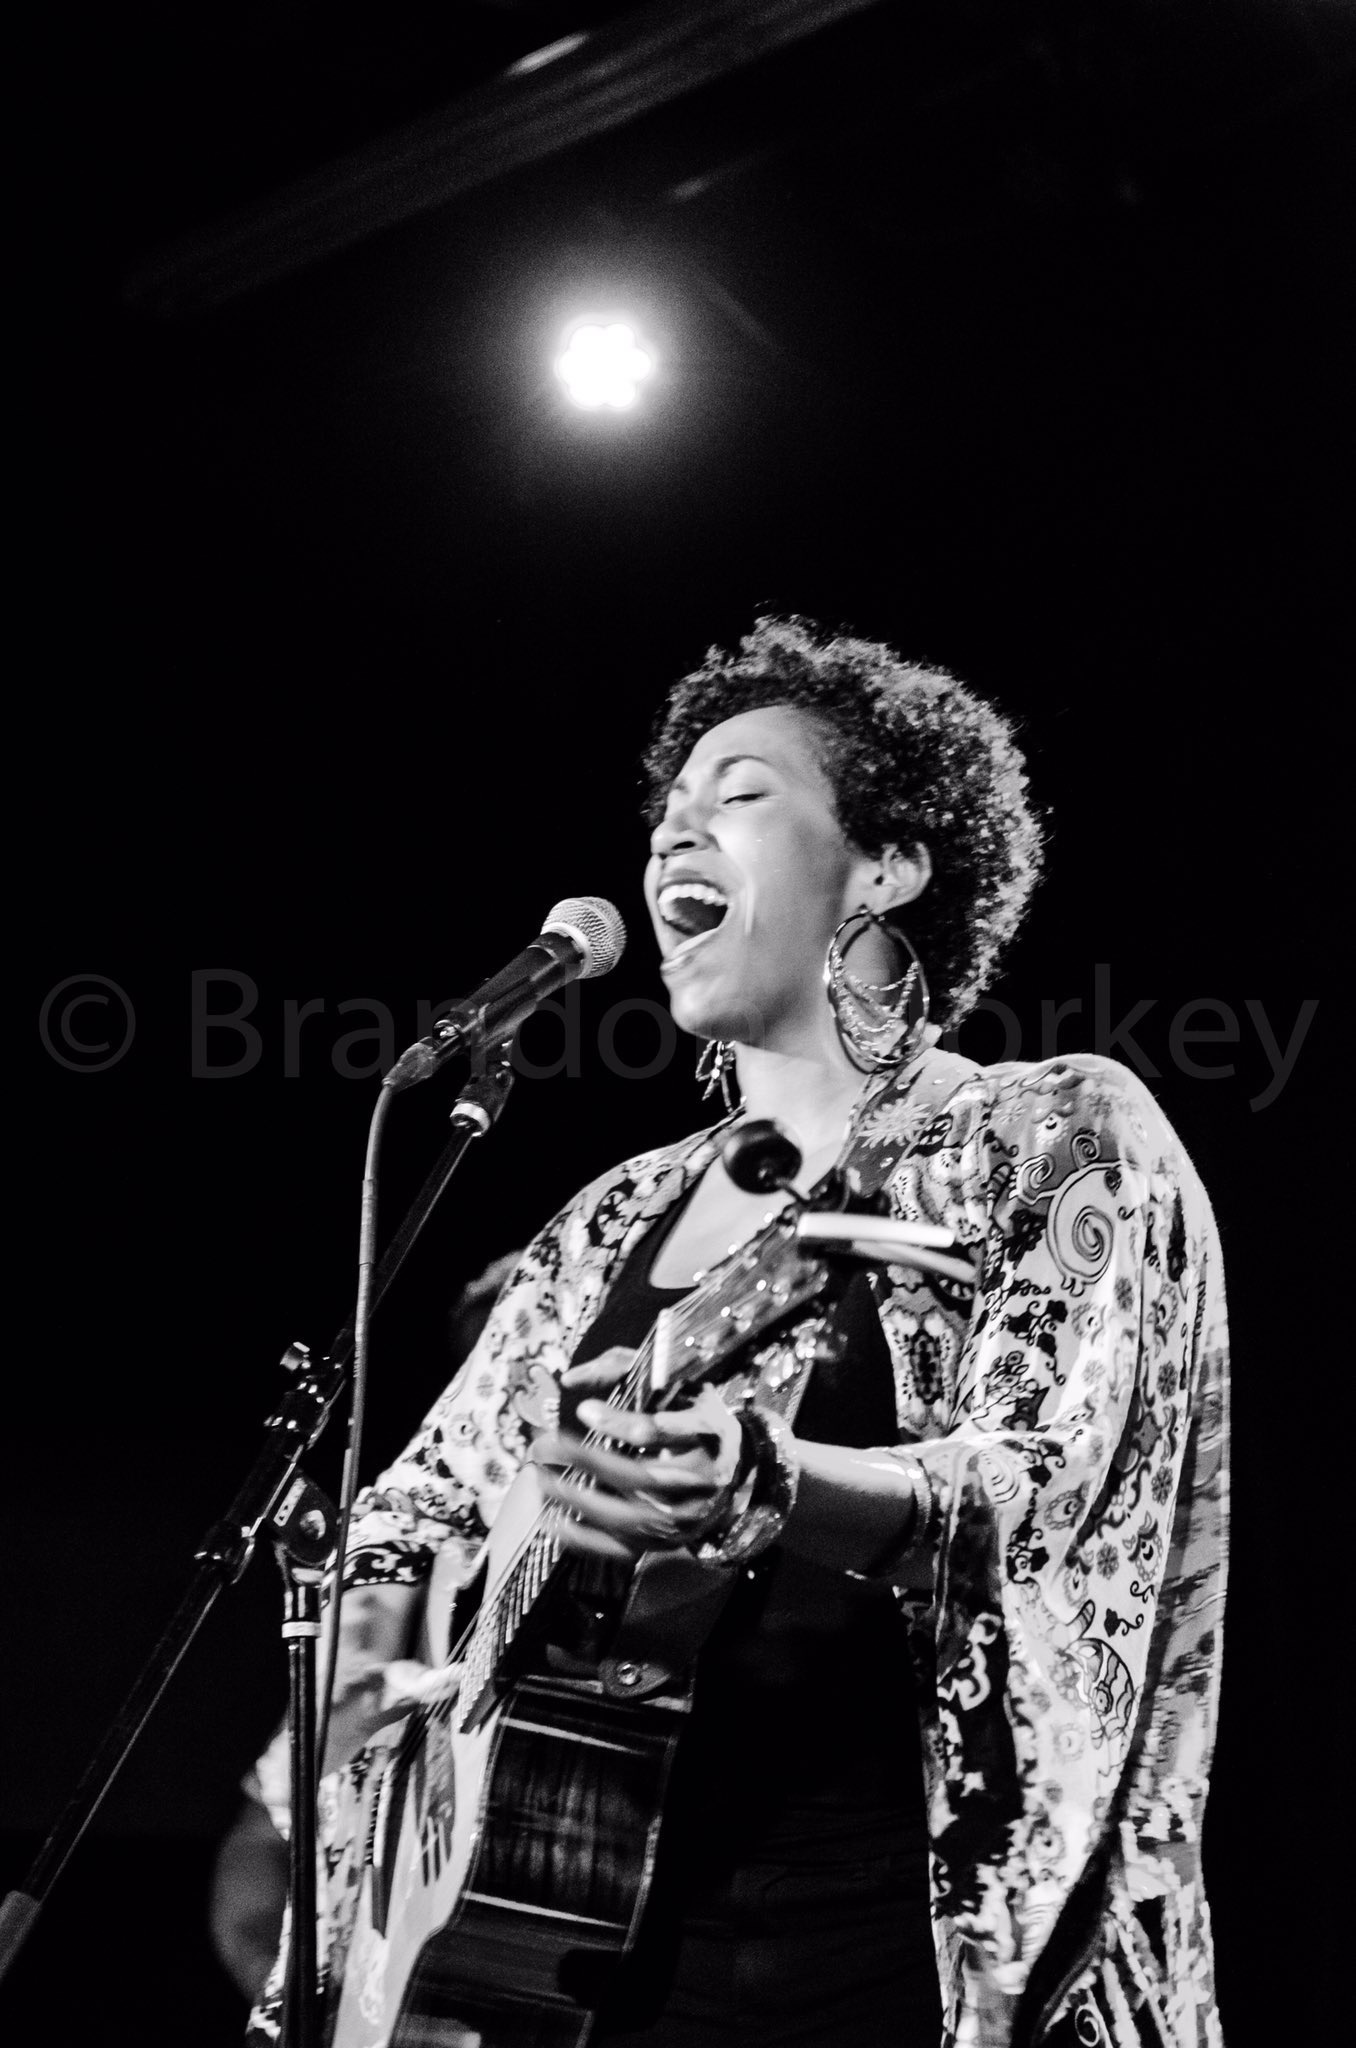 Black and white image of a woman playing acoustic guitar and singing into a microphone